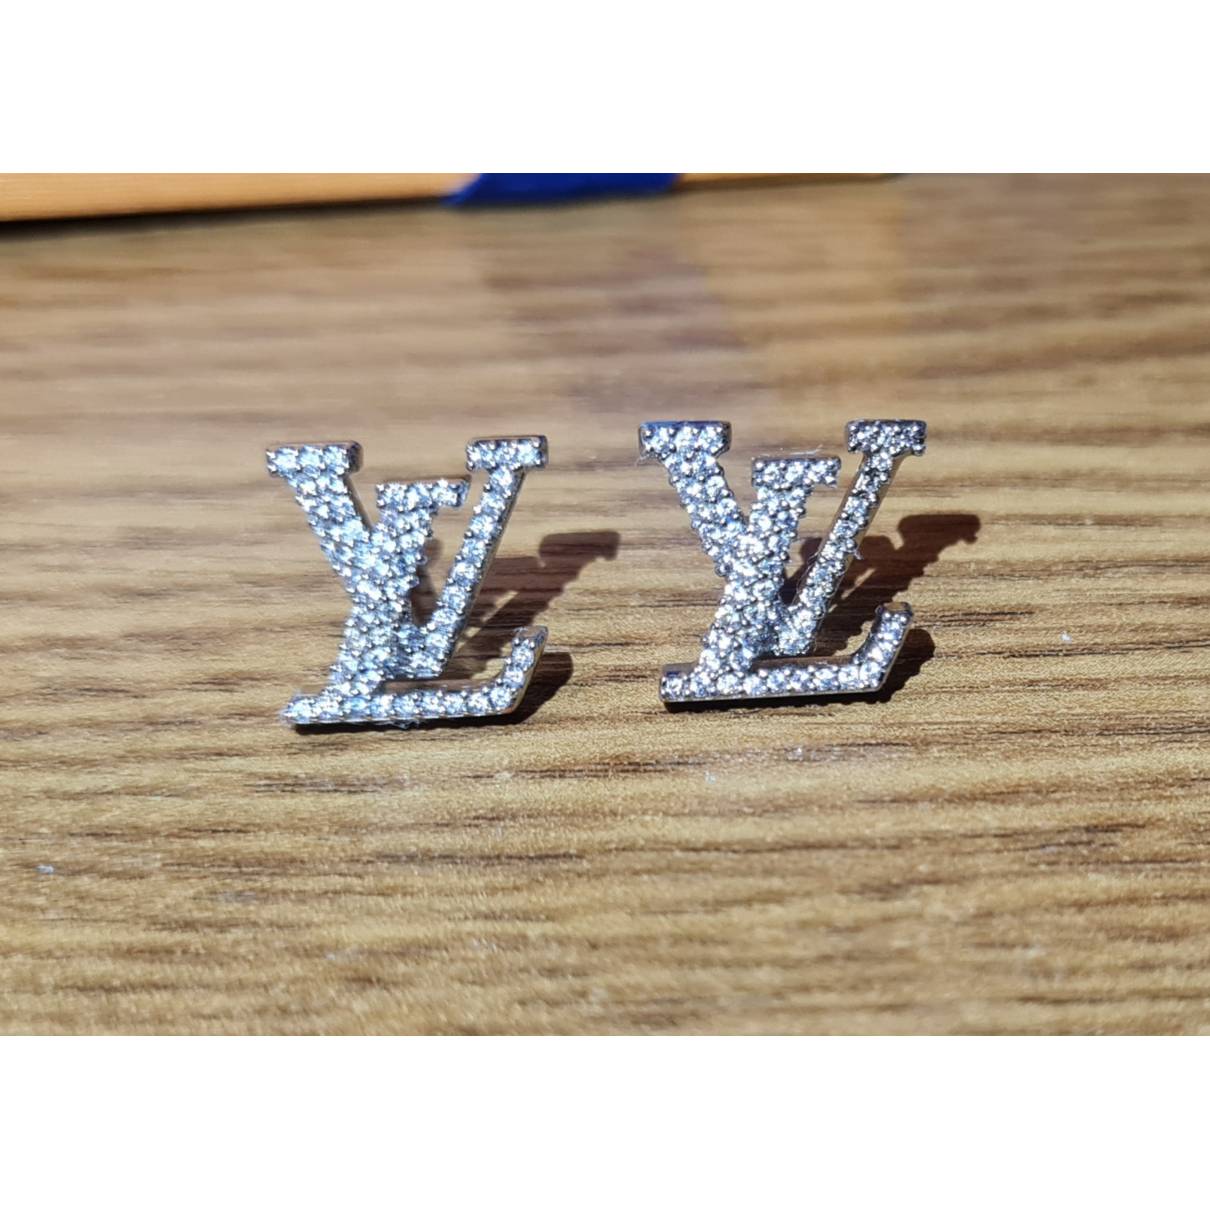 Louis Vuitton - Authenticated LV Iconic Earrings - Silver for Women, Never Worn